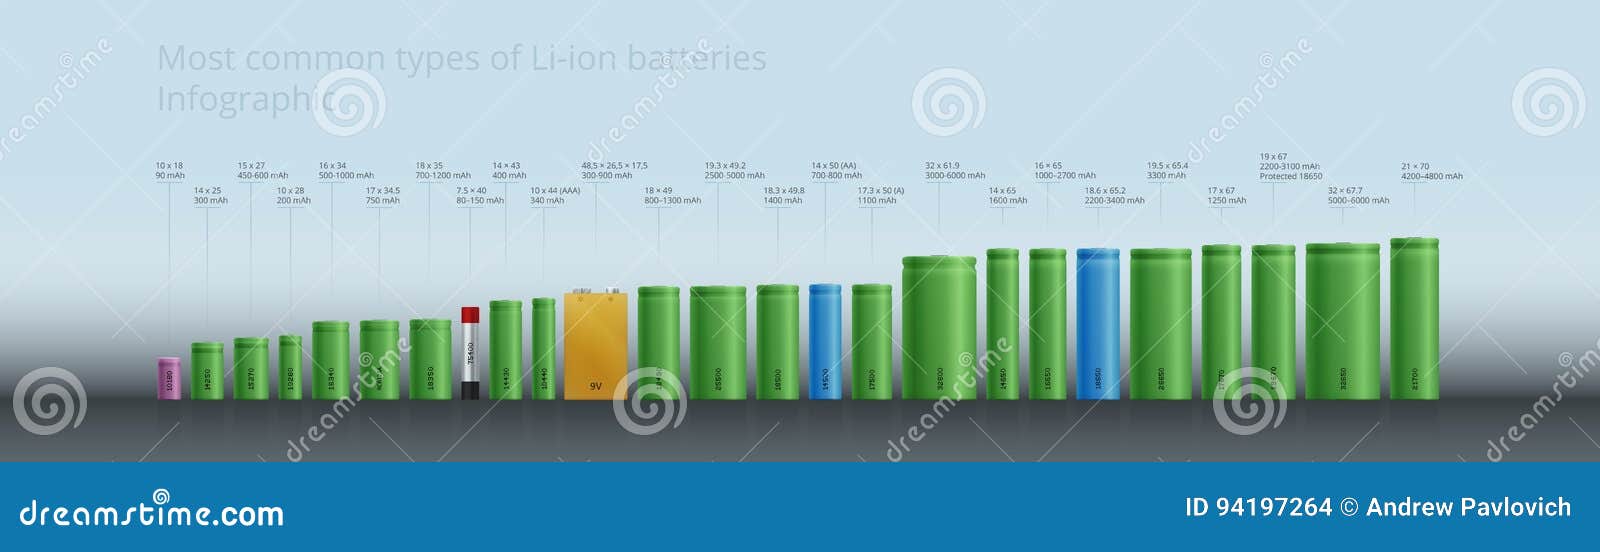 Types of Lithium Ion